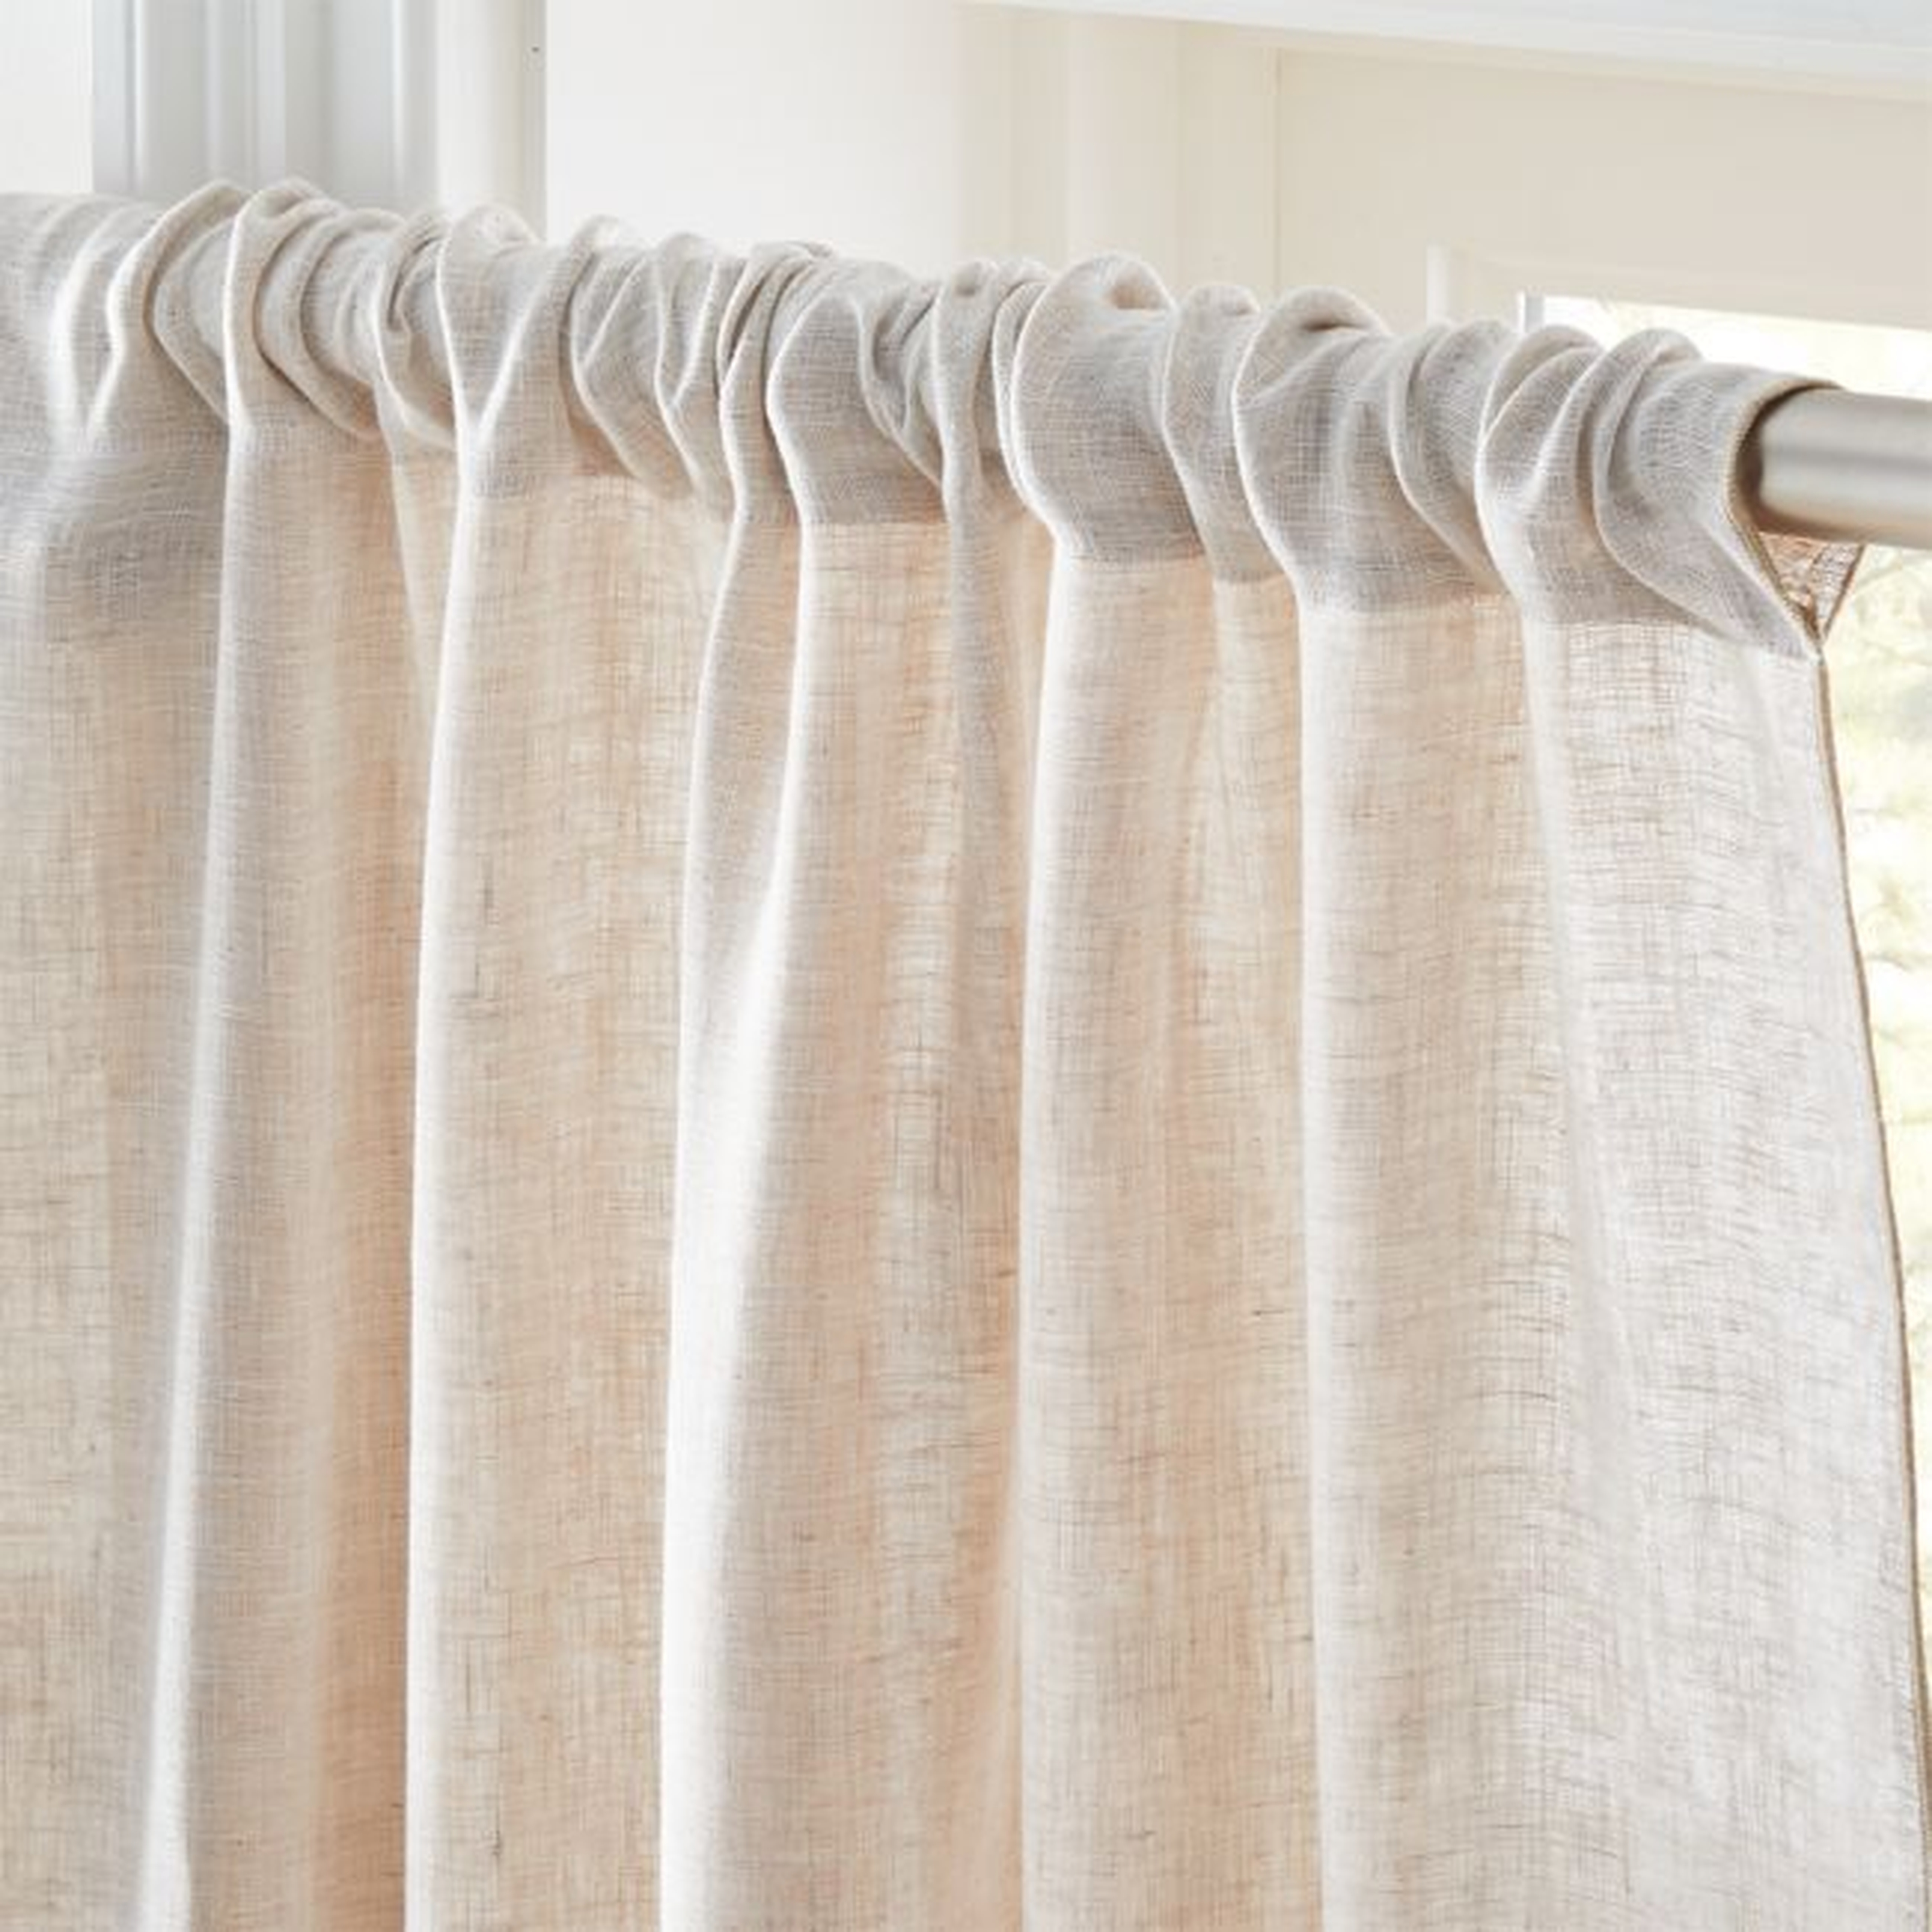 DOS WHITE AND NATURAL TWO-TONE CURTAIN PANEL 48"X84" - CB2